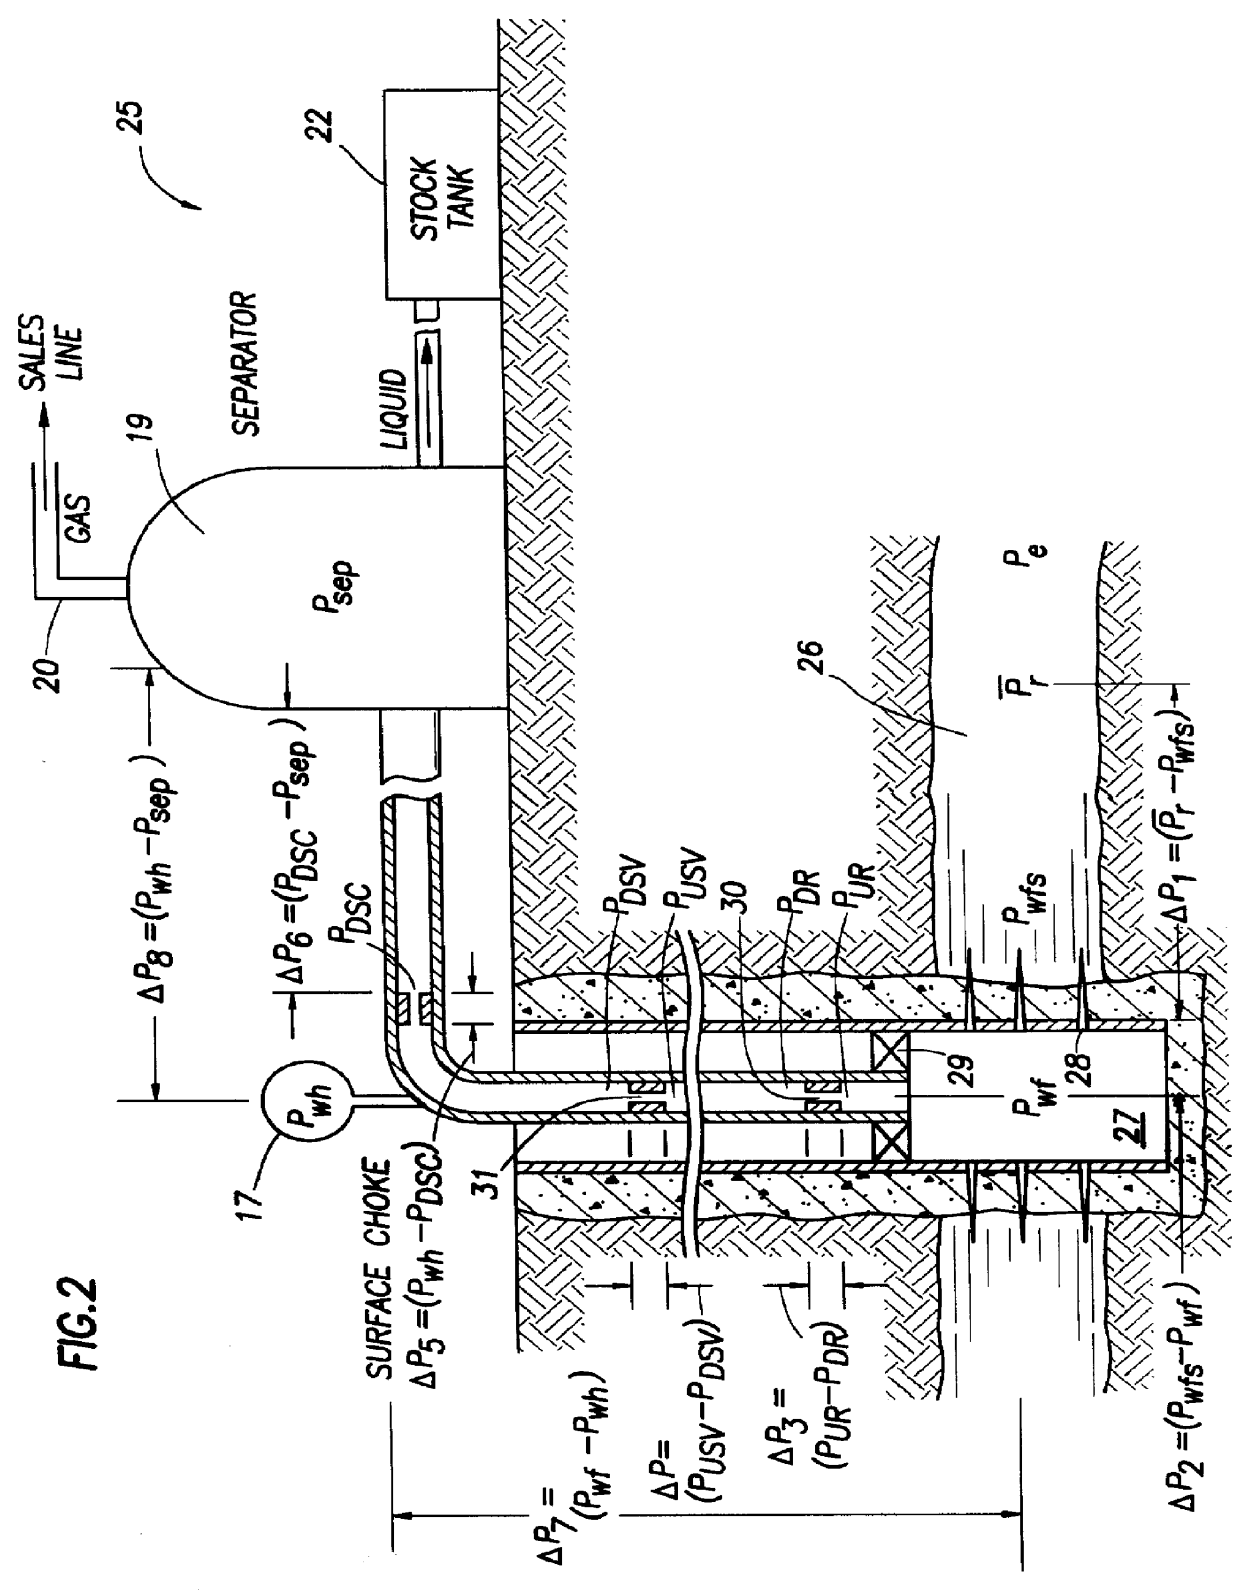 Oil and gas reservoir production analysis apparatus and method